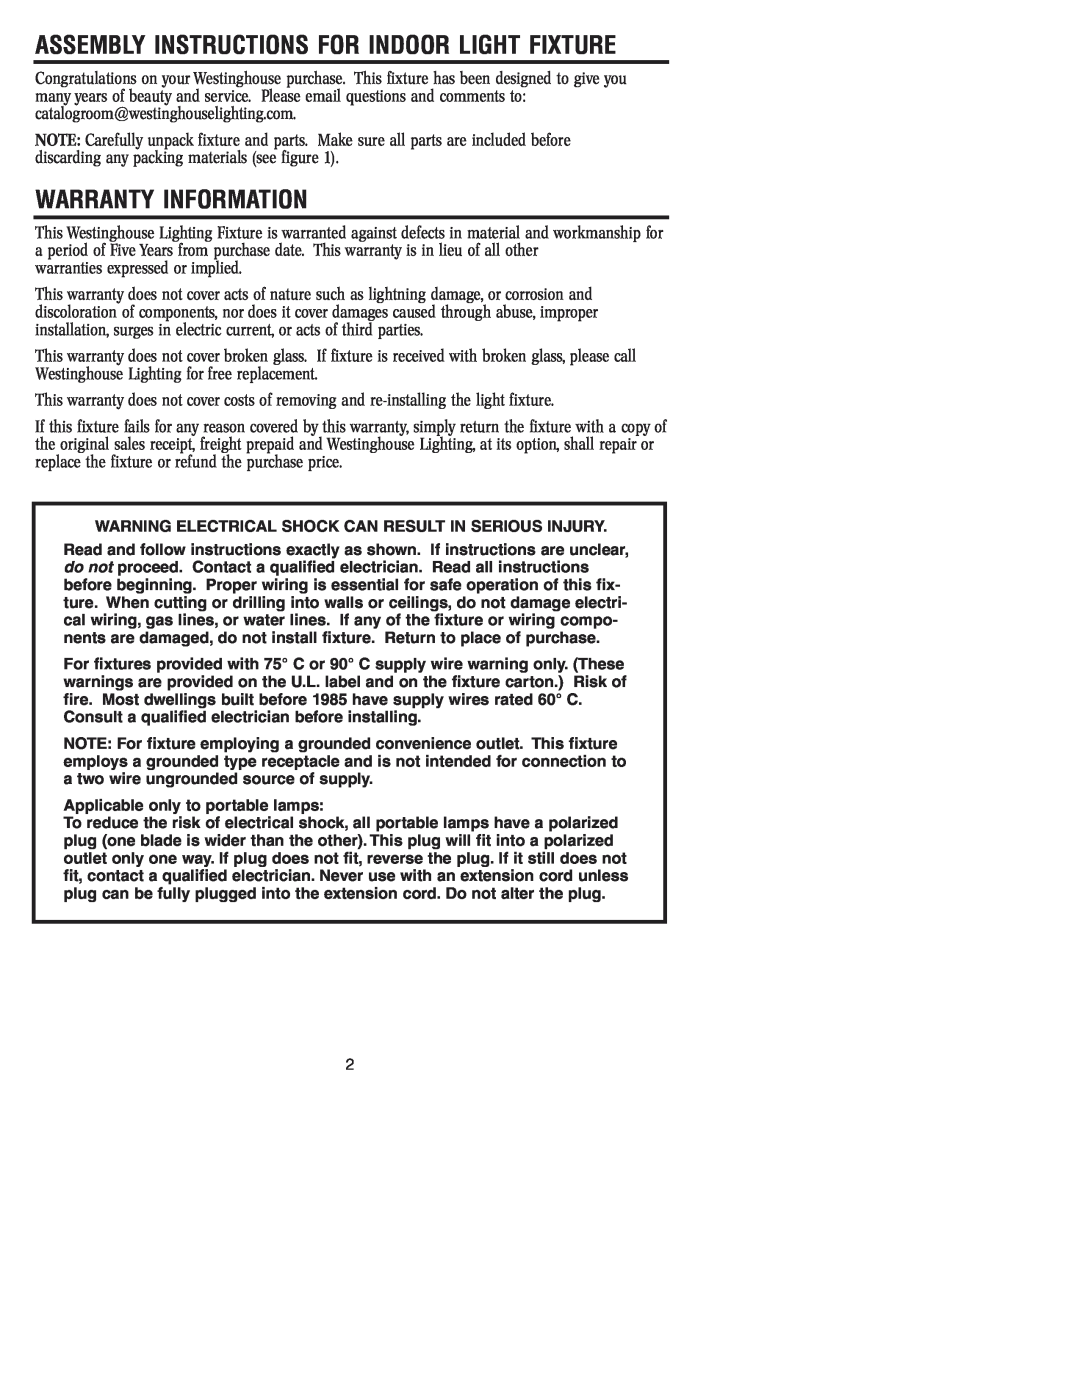 Westinghouse W-116 owner manual Warranty Information, Assembly Instructions For Indoor Light Fixture 